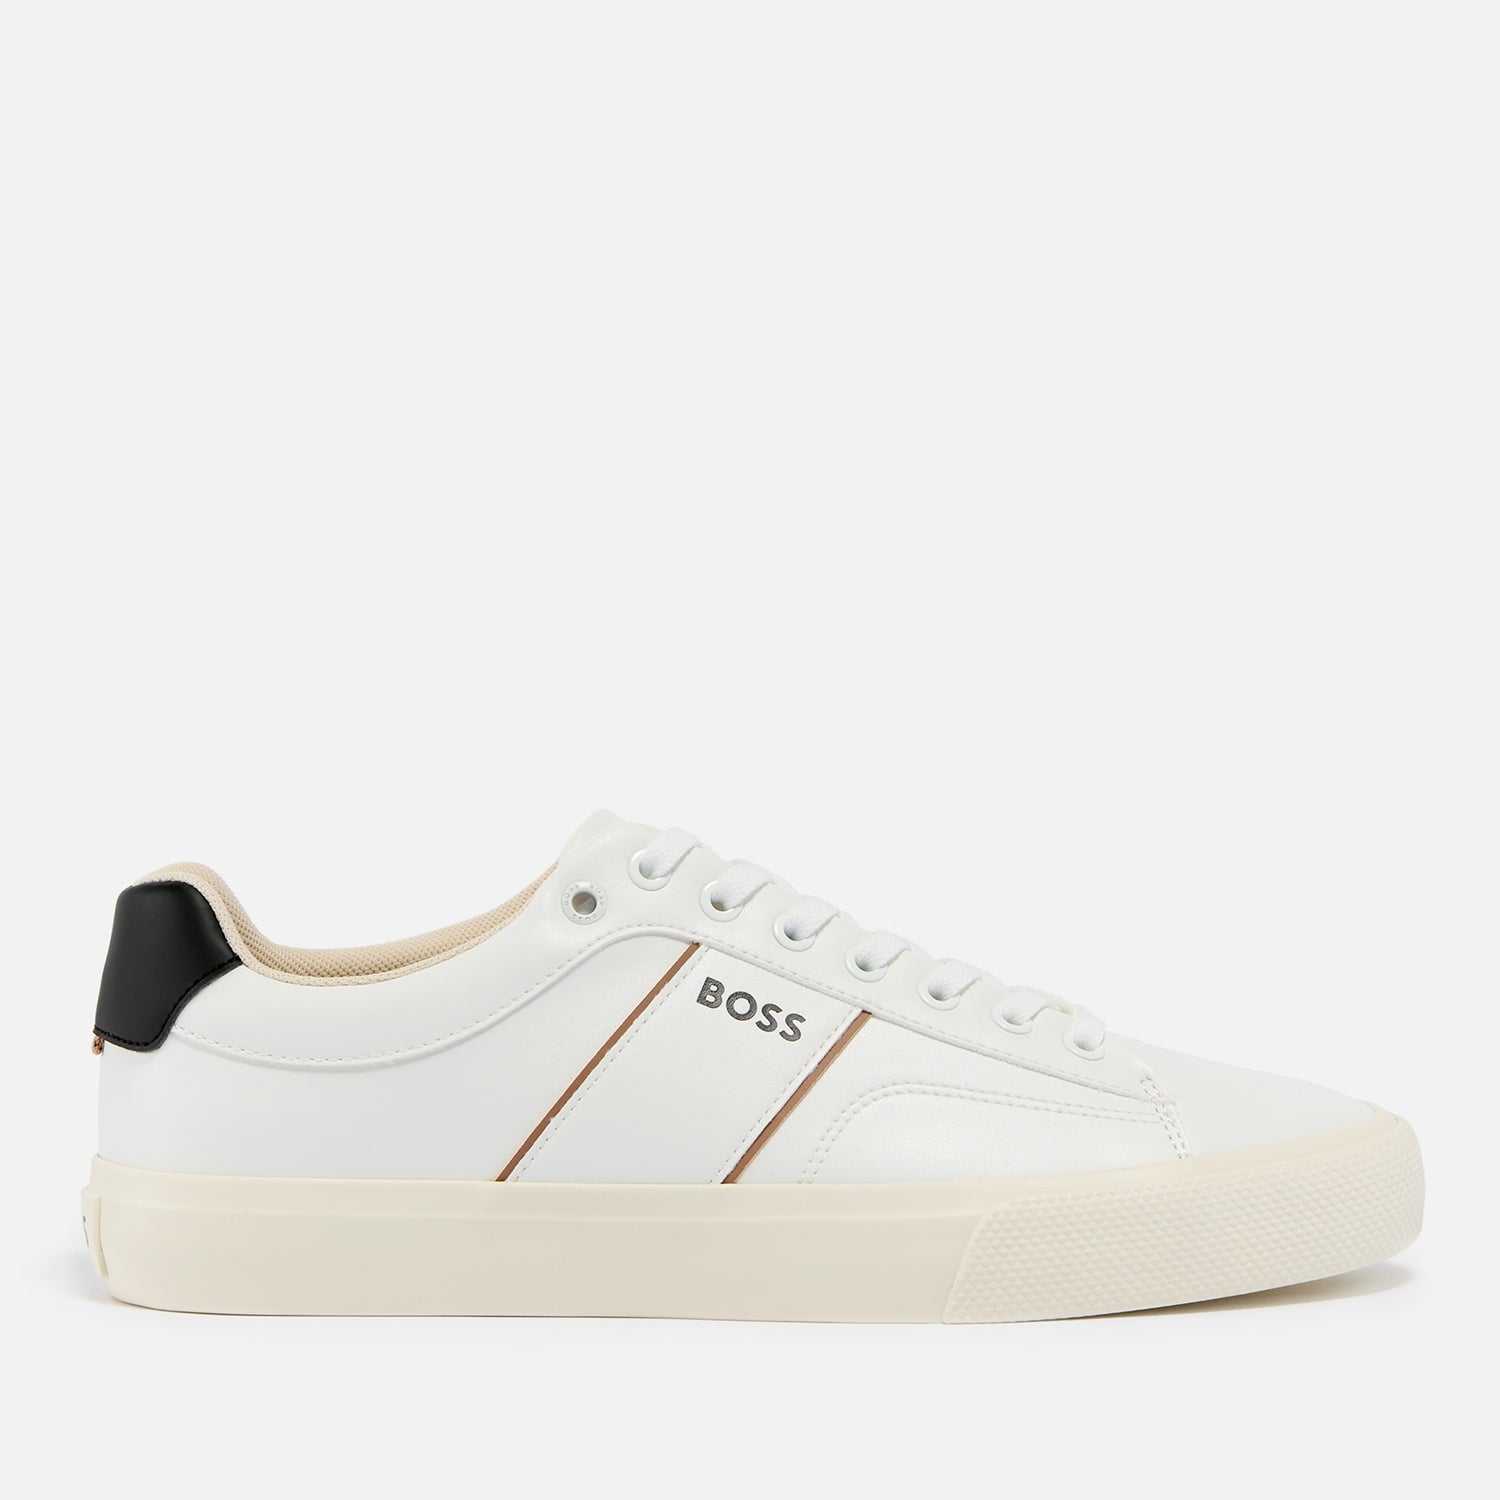 BOSS Men's Aiden Faux Leather Tennis Trainers - UK 11